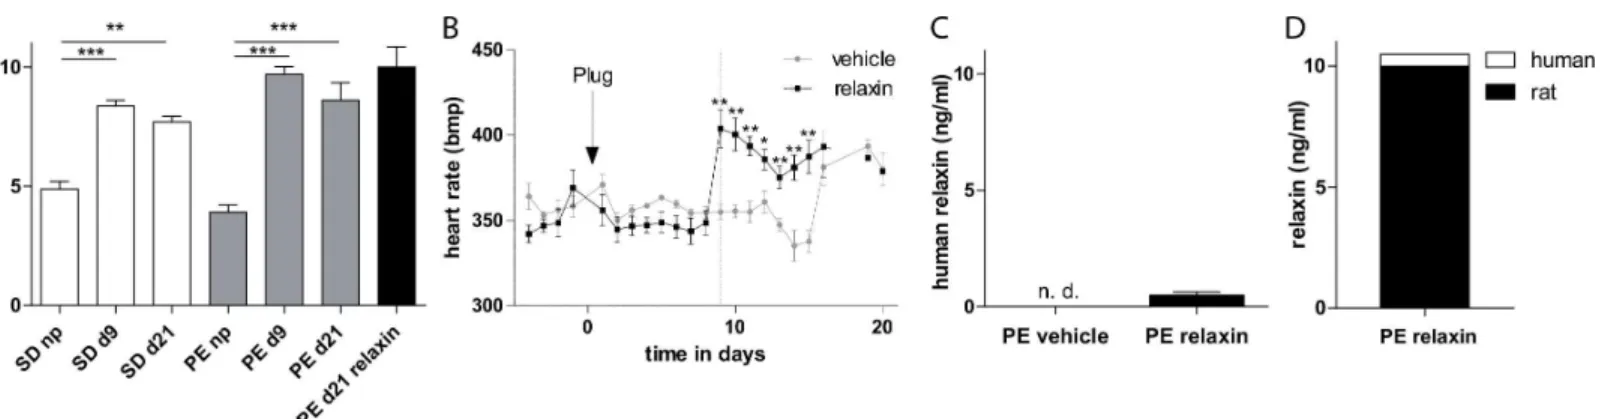 Fig 1. Effect of relaxin on heart rate and relaxin serum concentration. (A) Rat relaxin was increased during pregnancy in transgenic and non-transgenic control rats